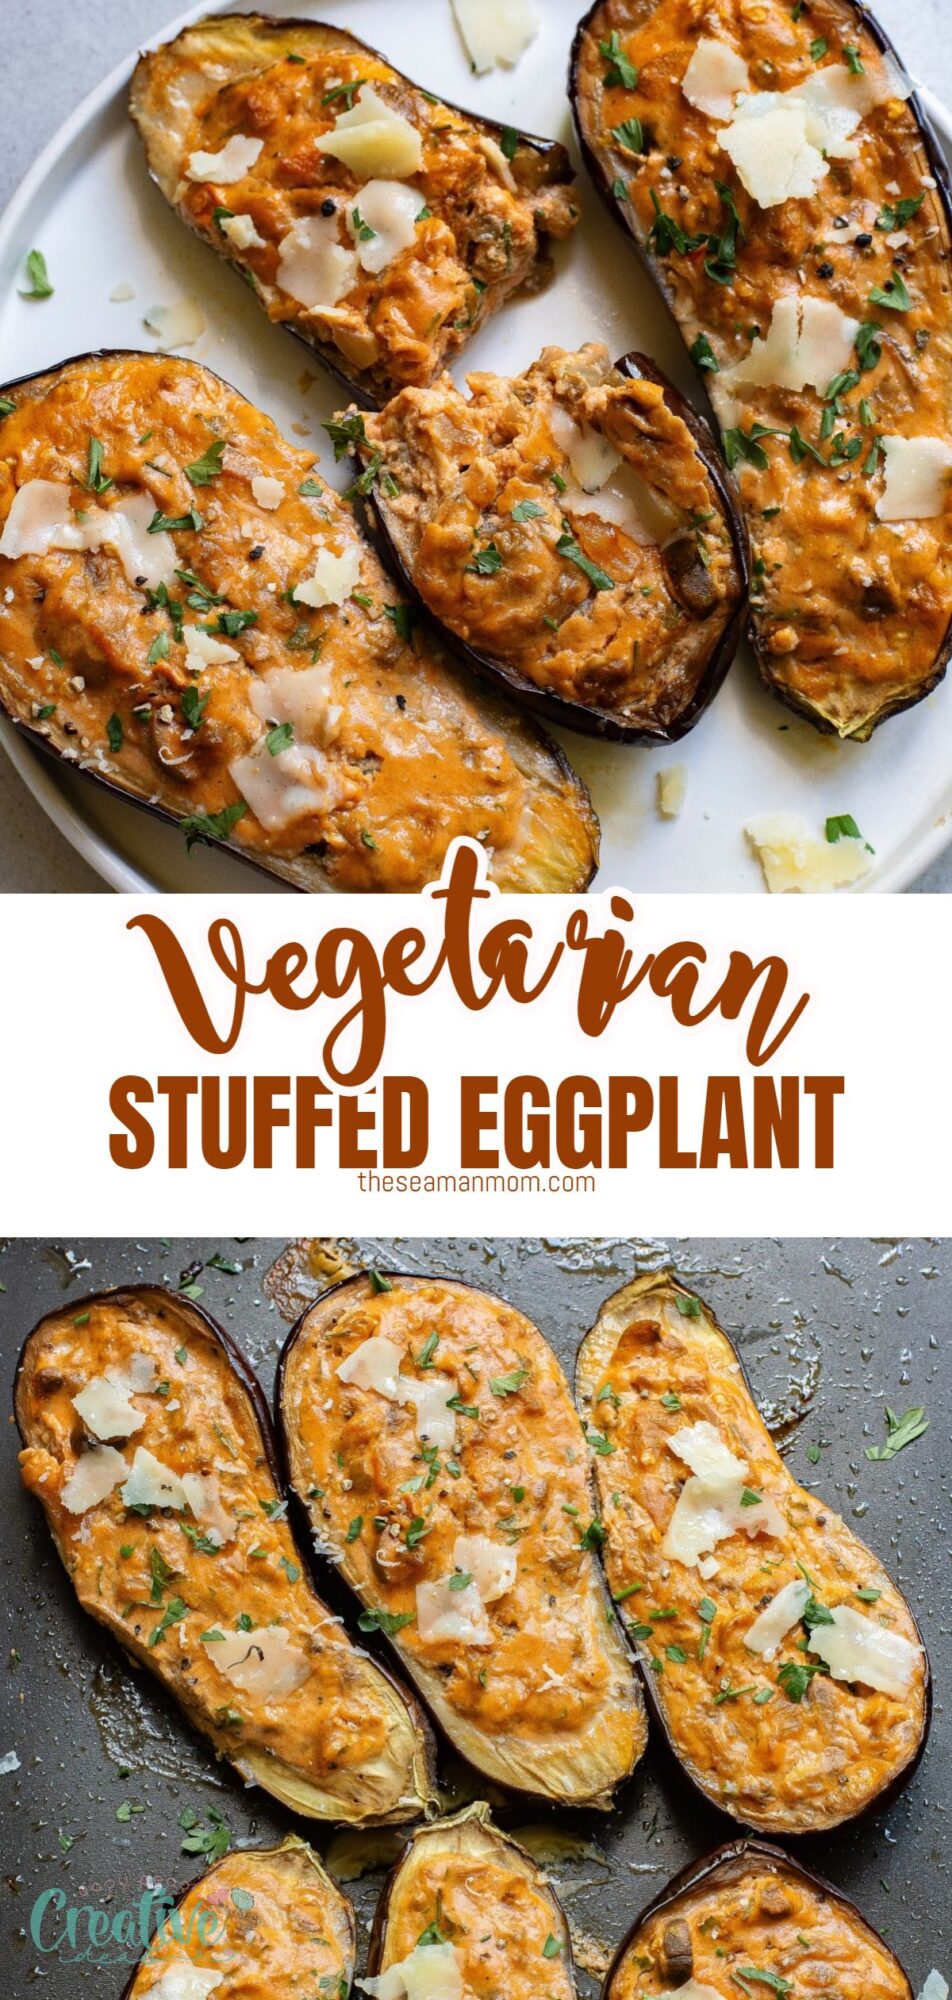 Tender stuffed eggplant filled with cheese, veggies, spices, and wholesome goodness. Perfect for a scrumptious and nutritious meal!